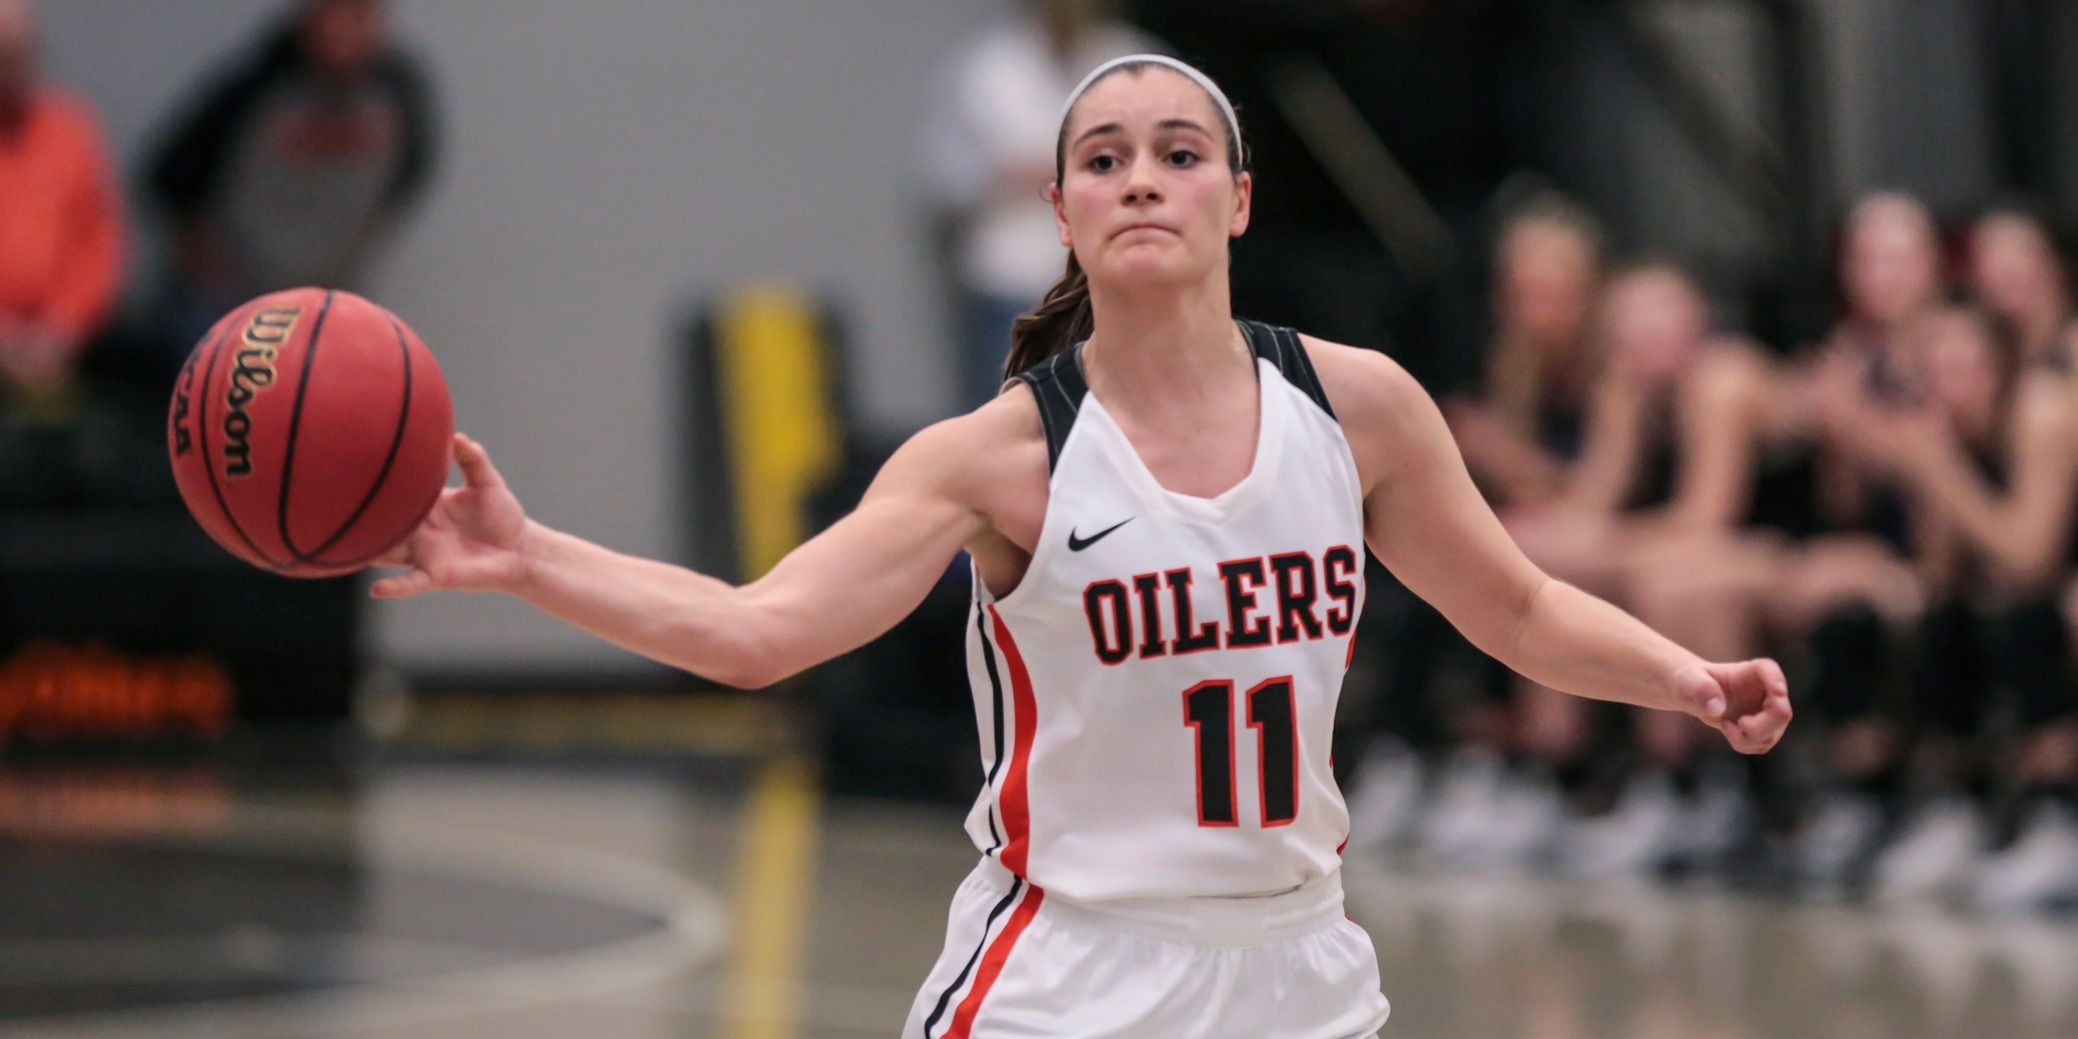 Oilers Cruise Past Storm at Home